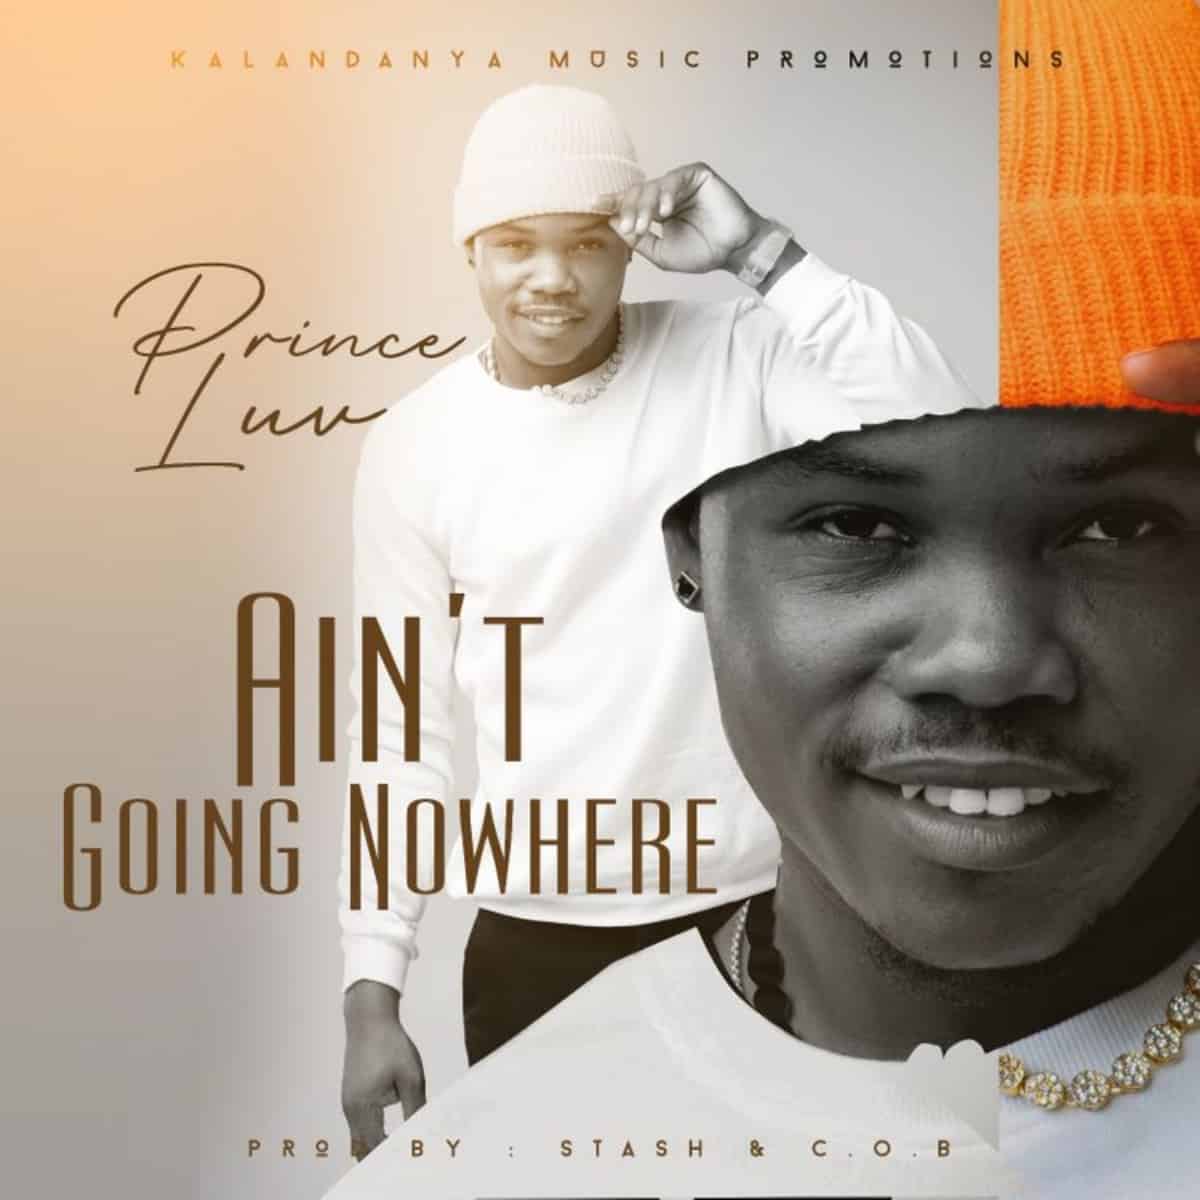 DOWNLOAD: Prince Luv – “AIN’T GOING NOWHERE” Mp3